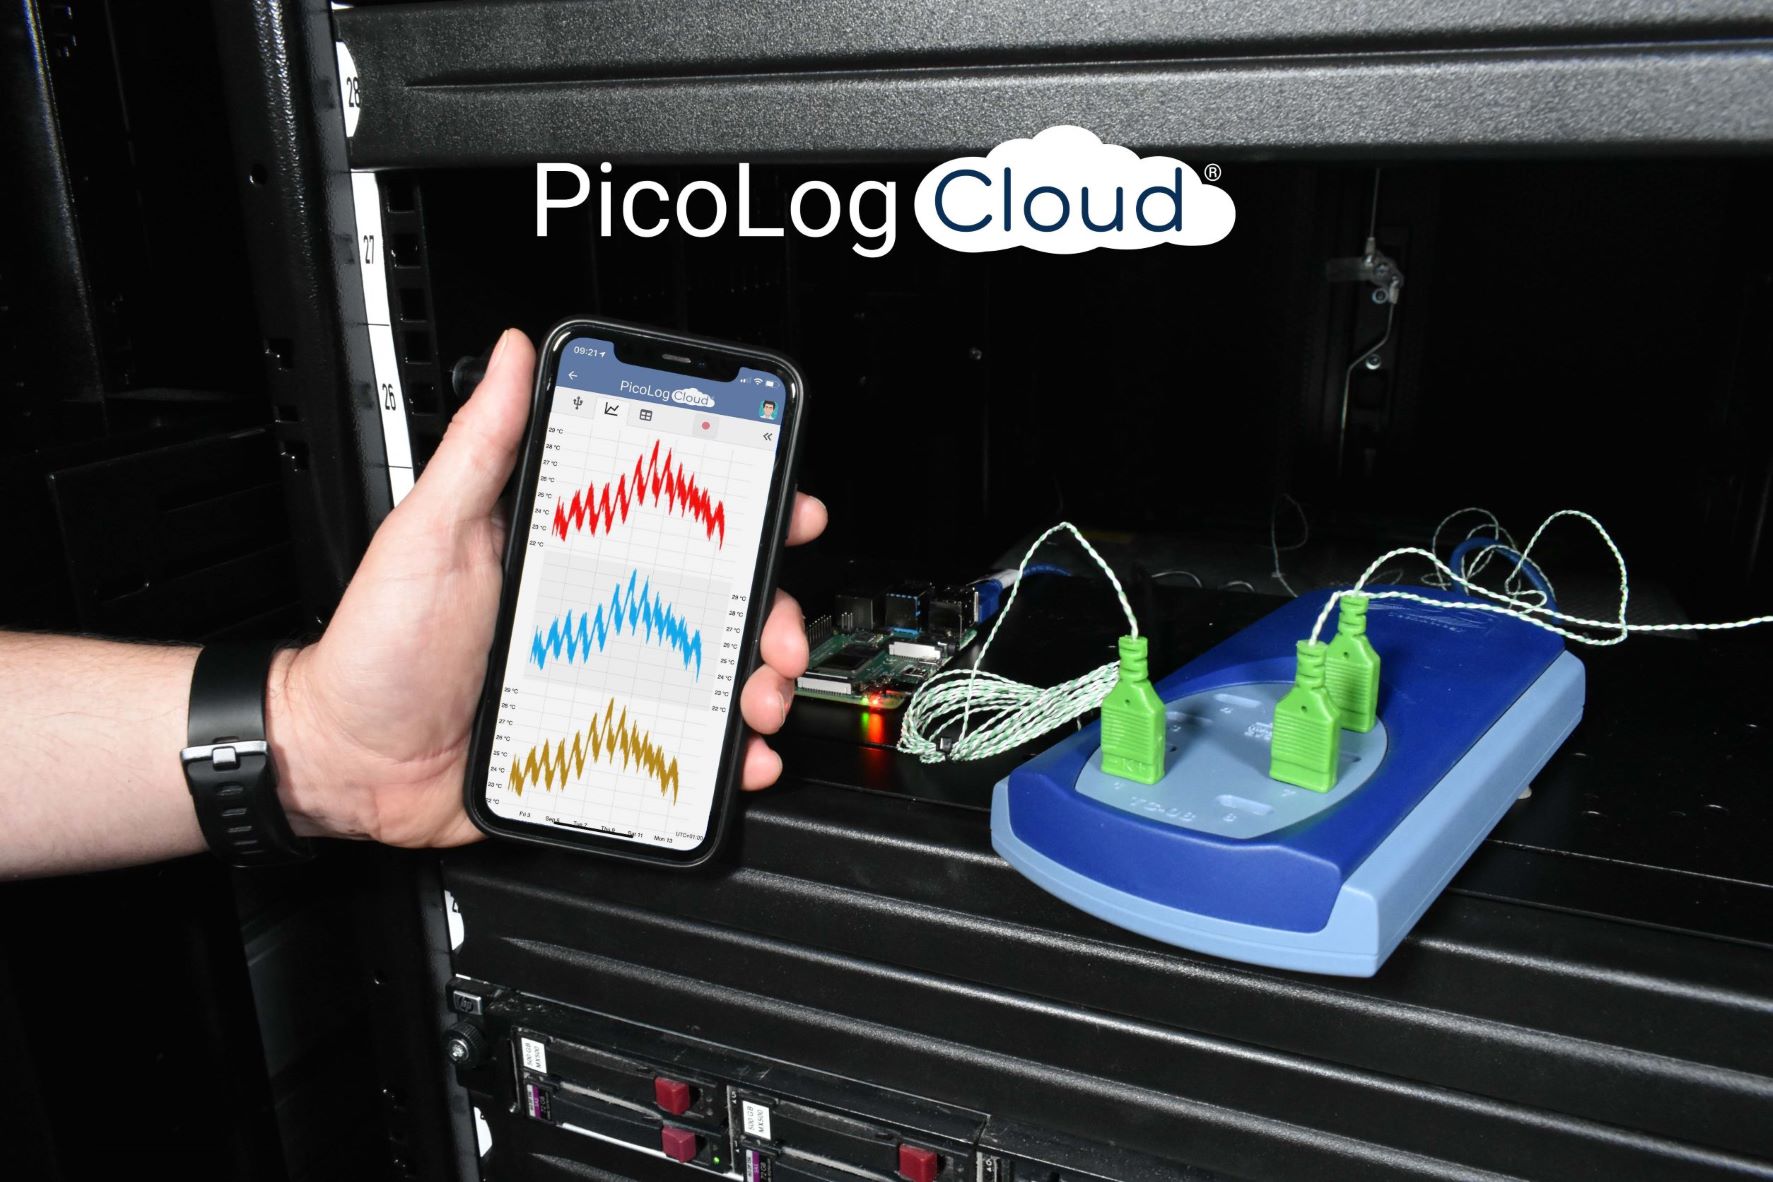 Monitor server health using PicoLog Cloud and Pico Technology data loggers